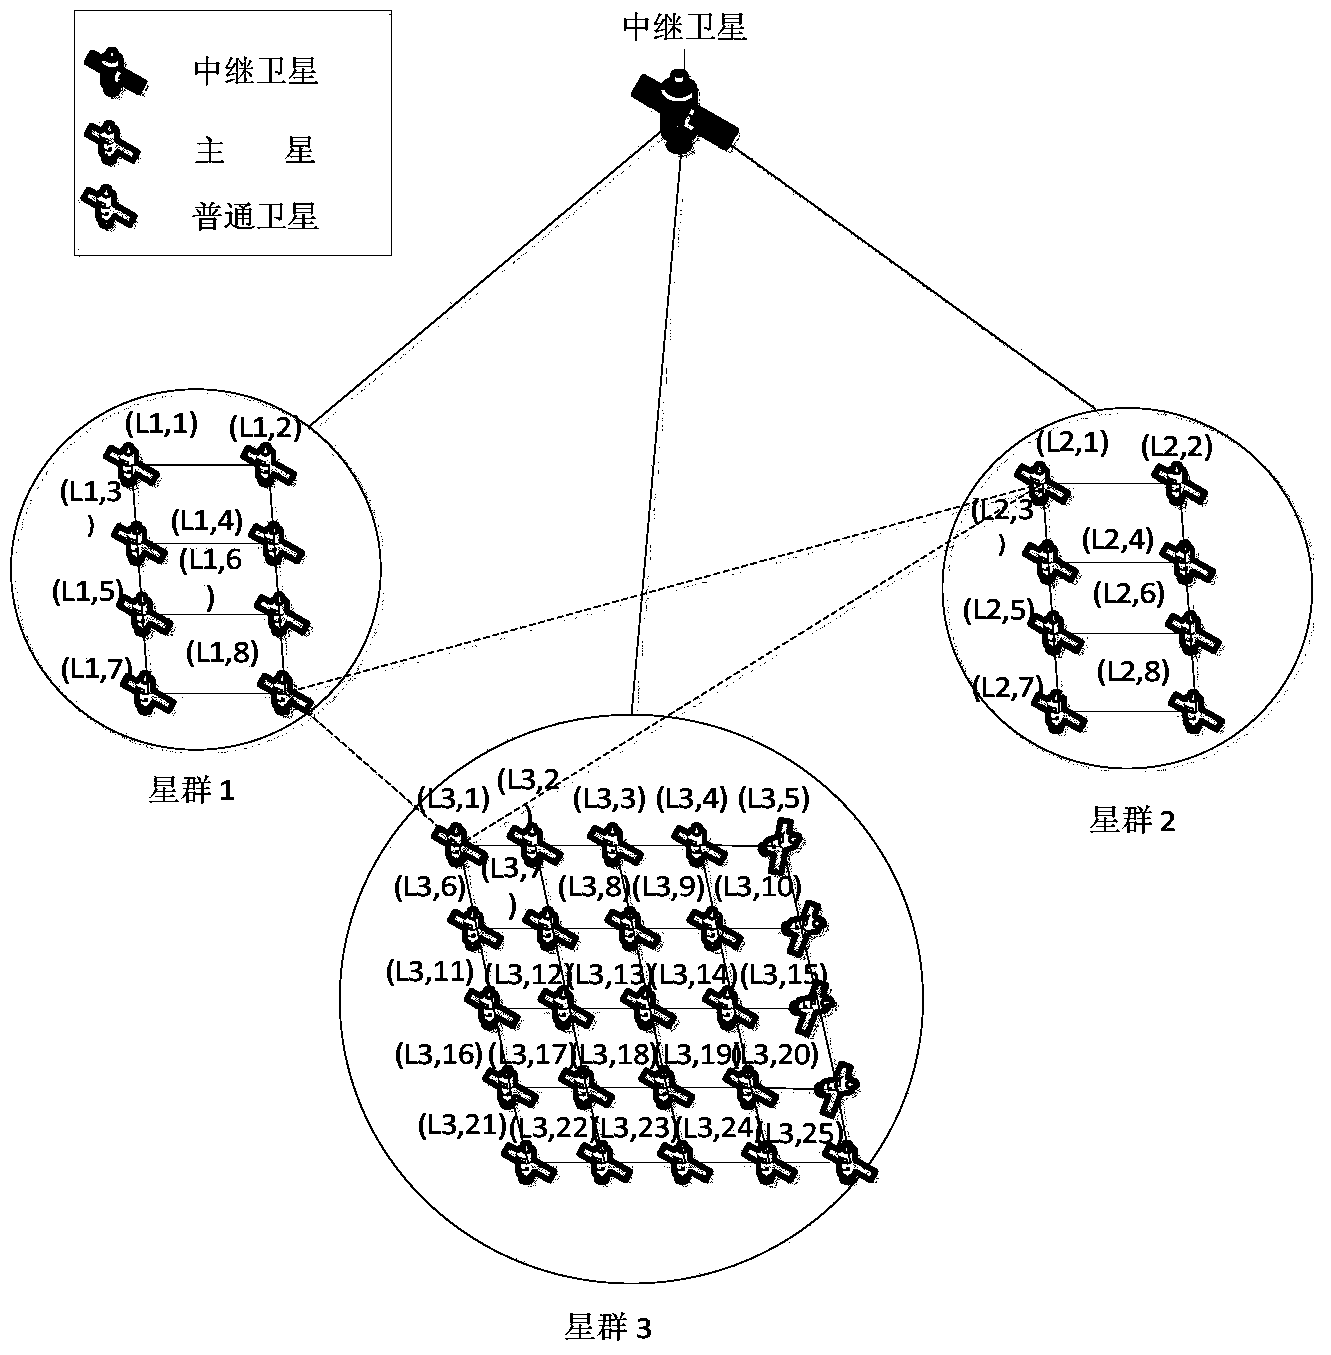 Inter-group routing method for distributed satellite network